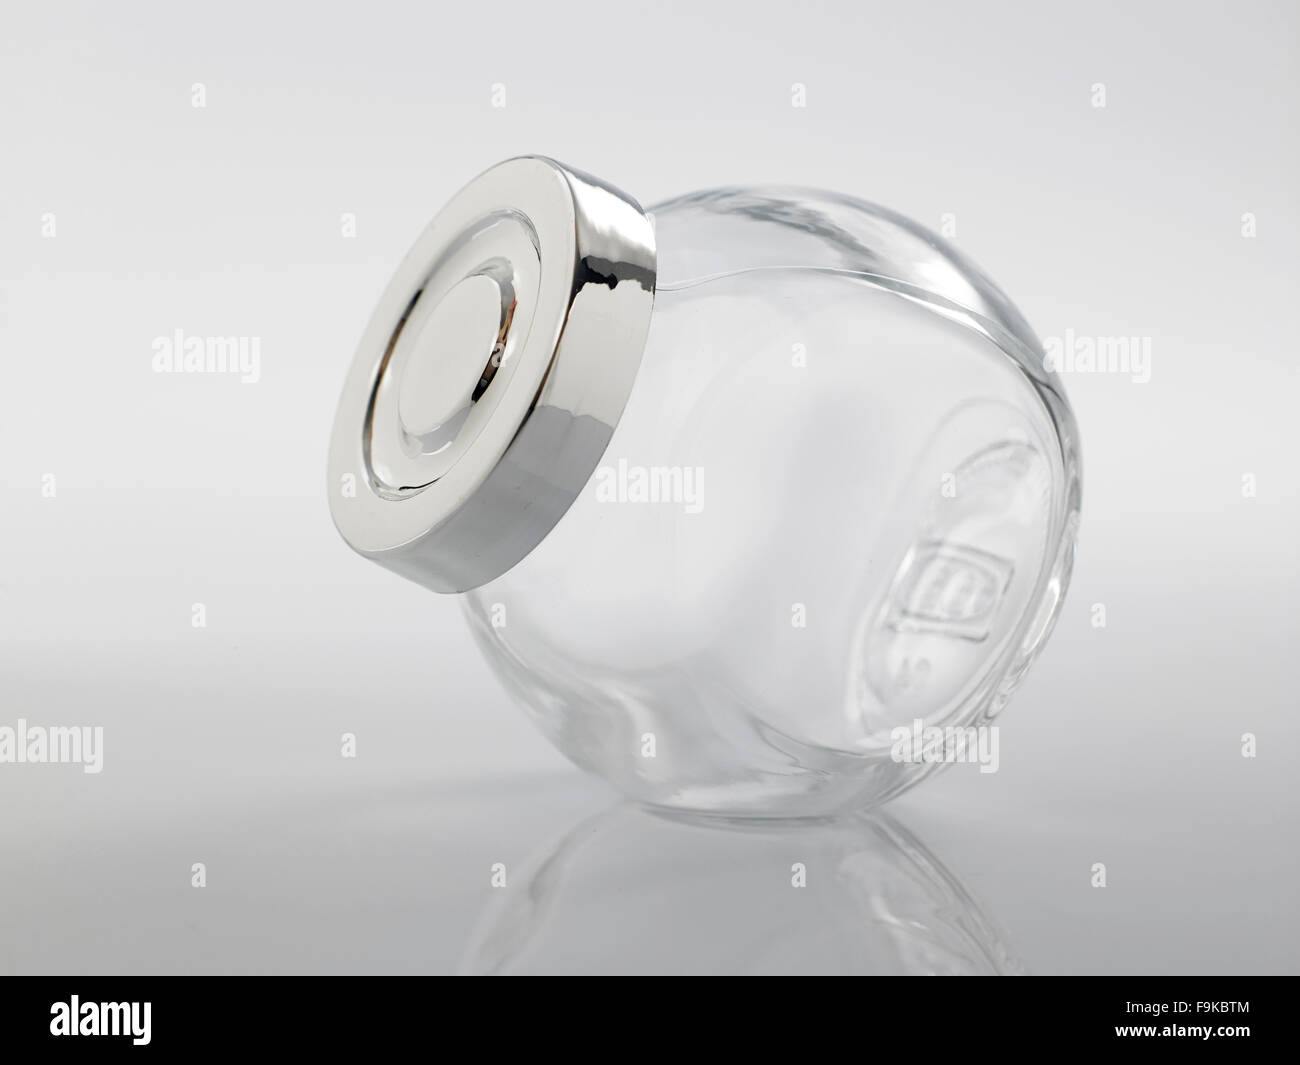 Glass jar for condiment with lid on white background Stock Photo